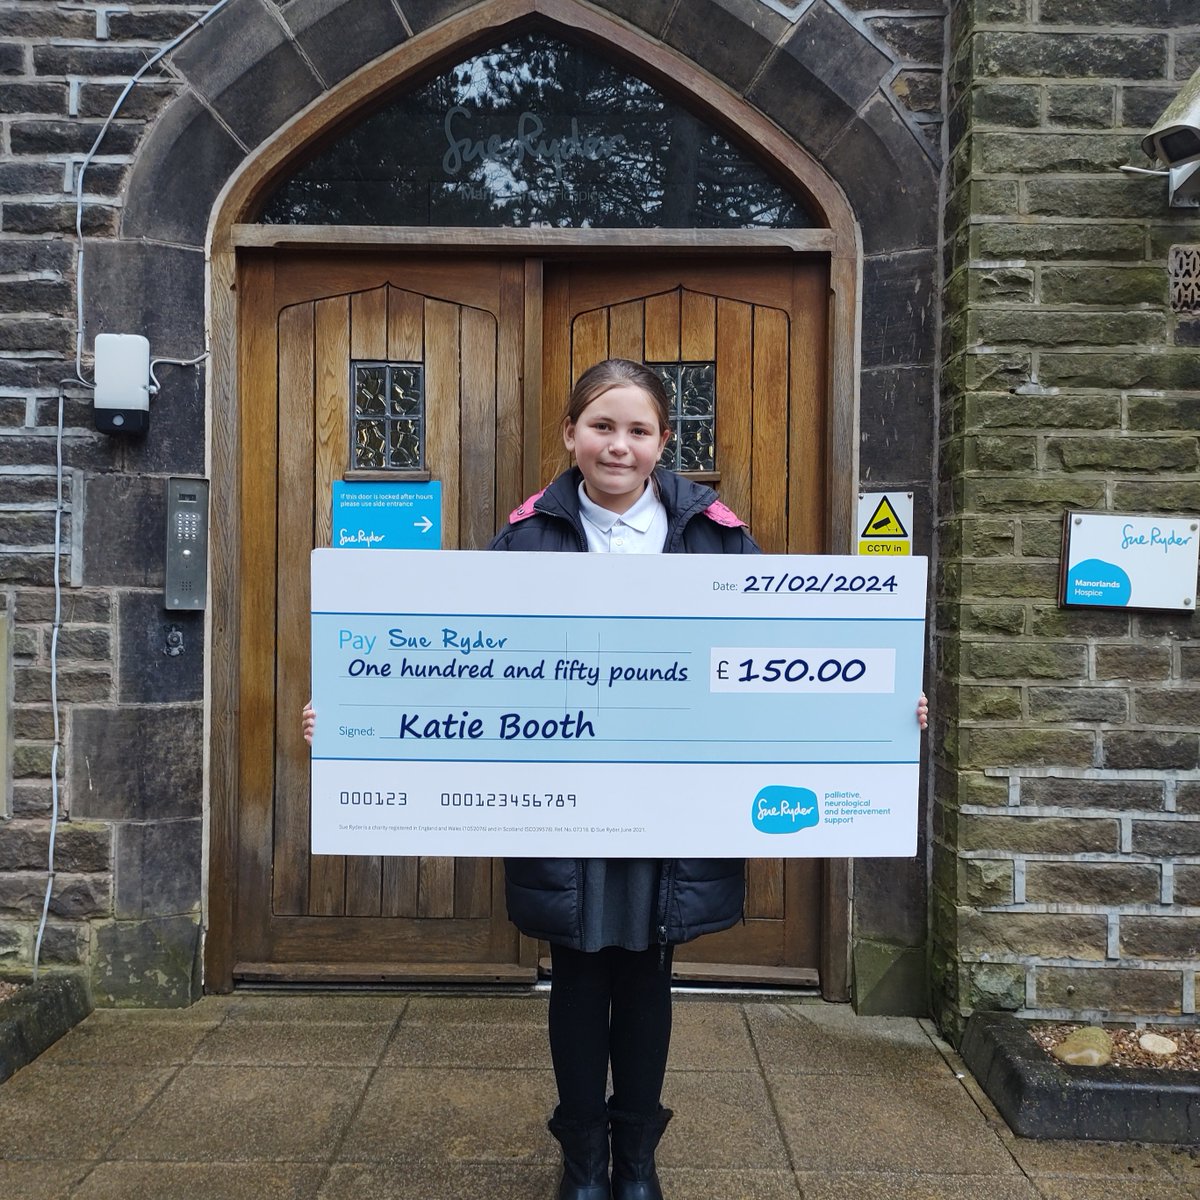 Thank you to 11-year-old superstar Katie Booth, who visited our hospice to donate £150 she raised by selling her handmade bracelets. She says, “I wanted to raise money for you as you help people every day and Manorlands is close to our hearts.”